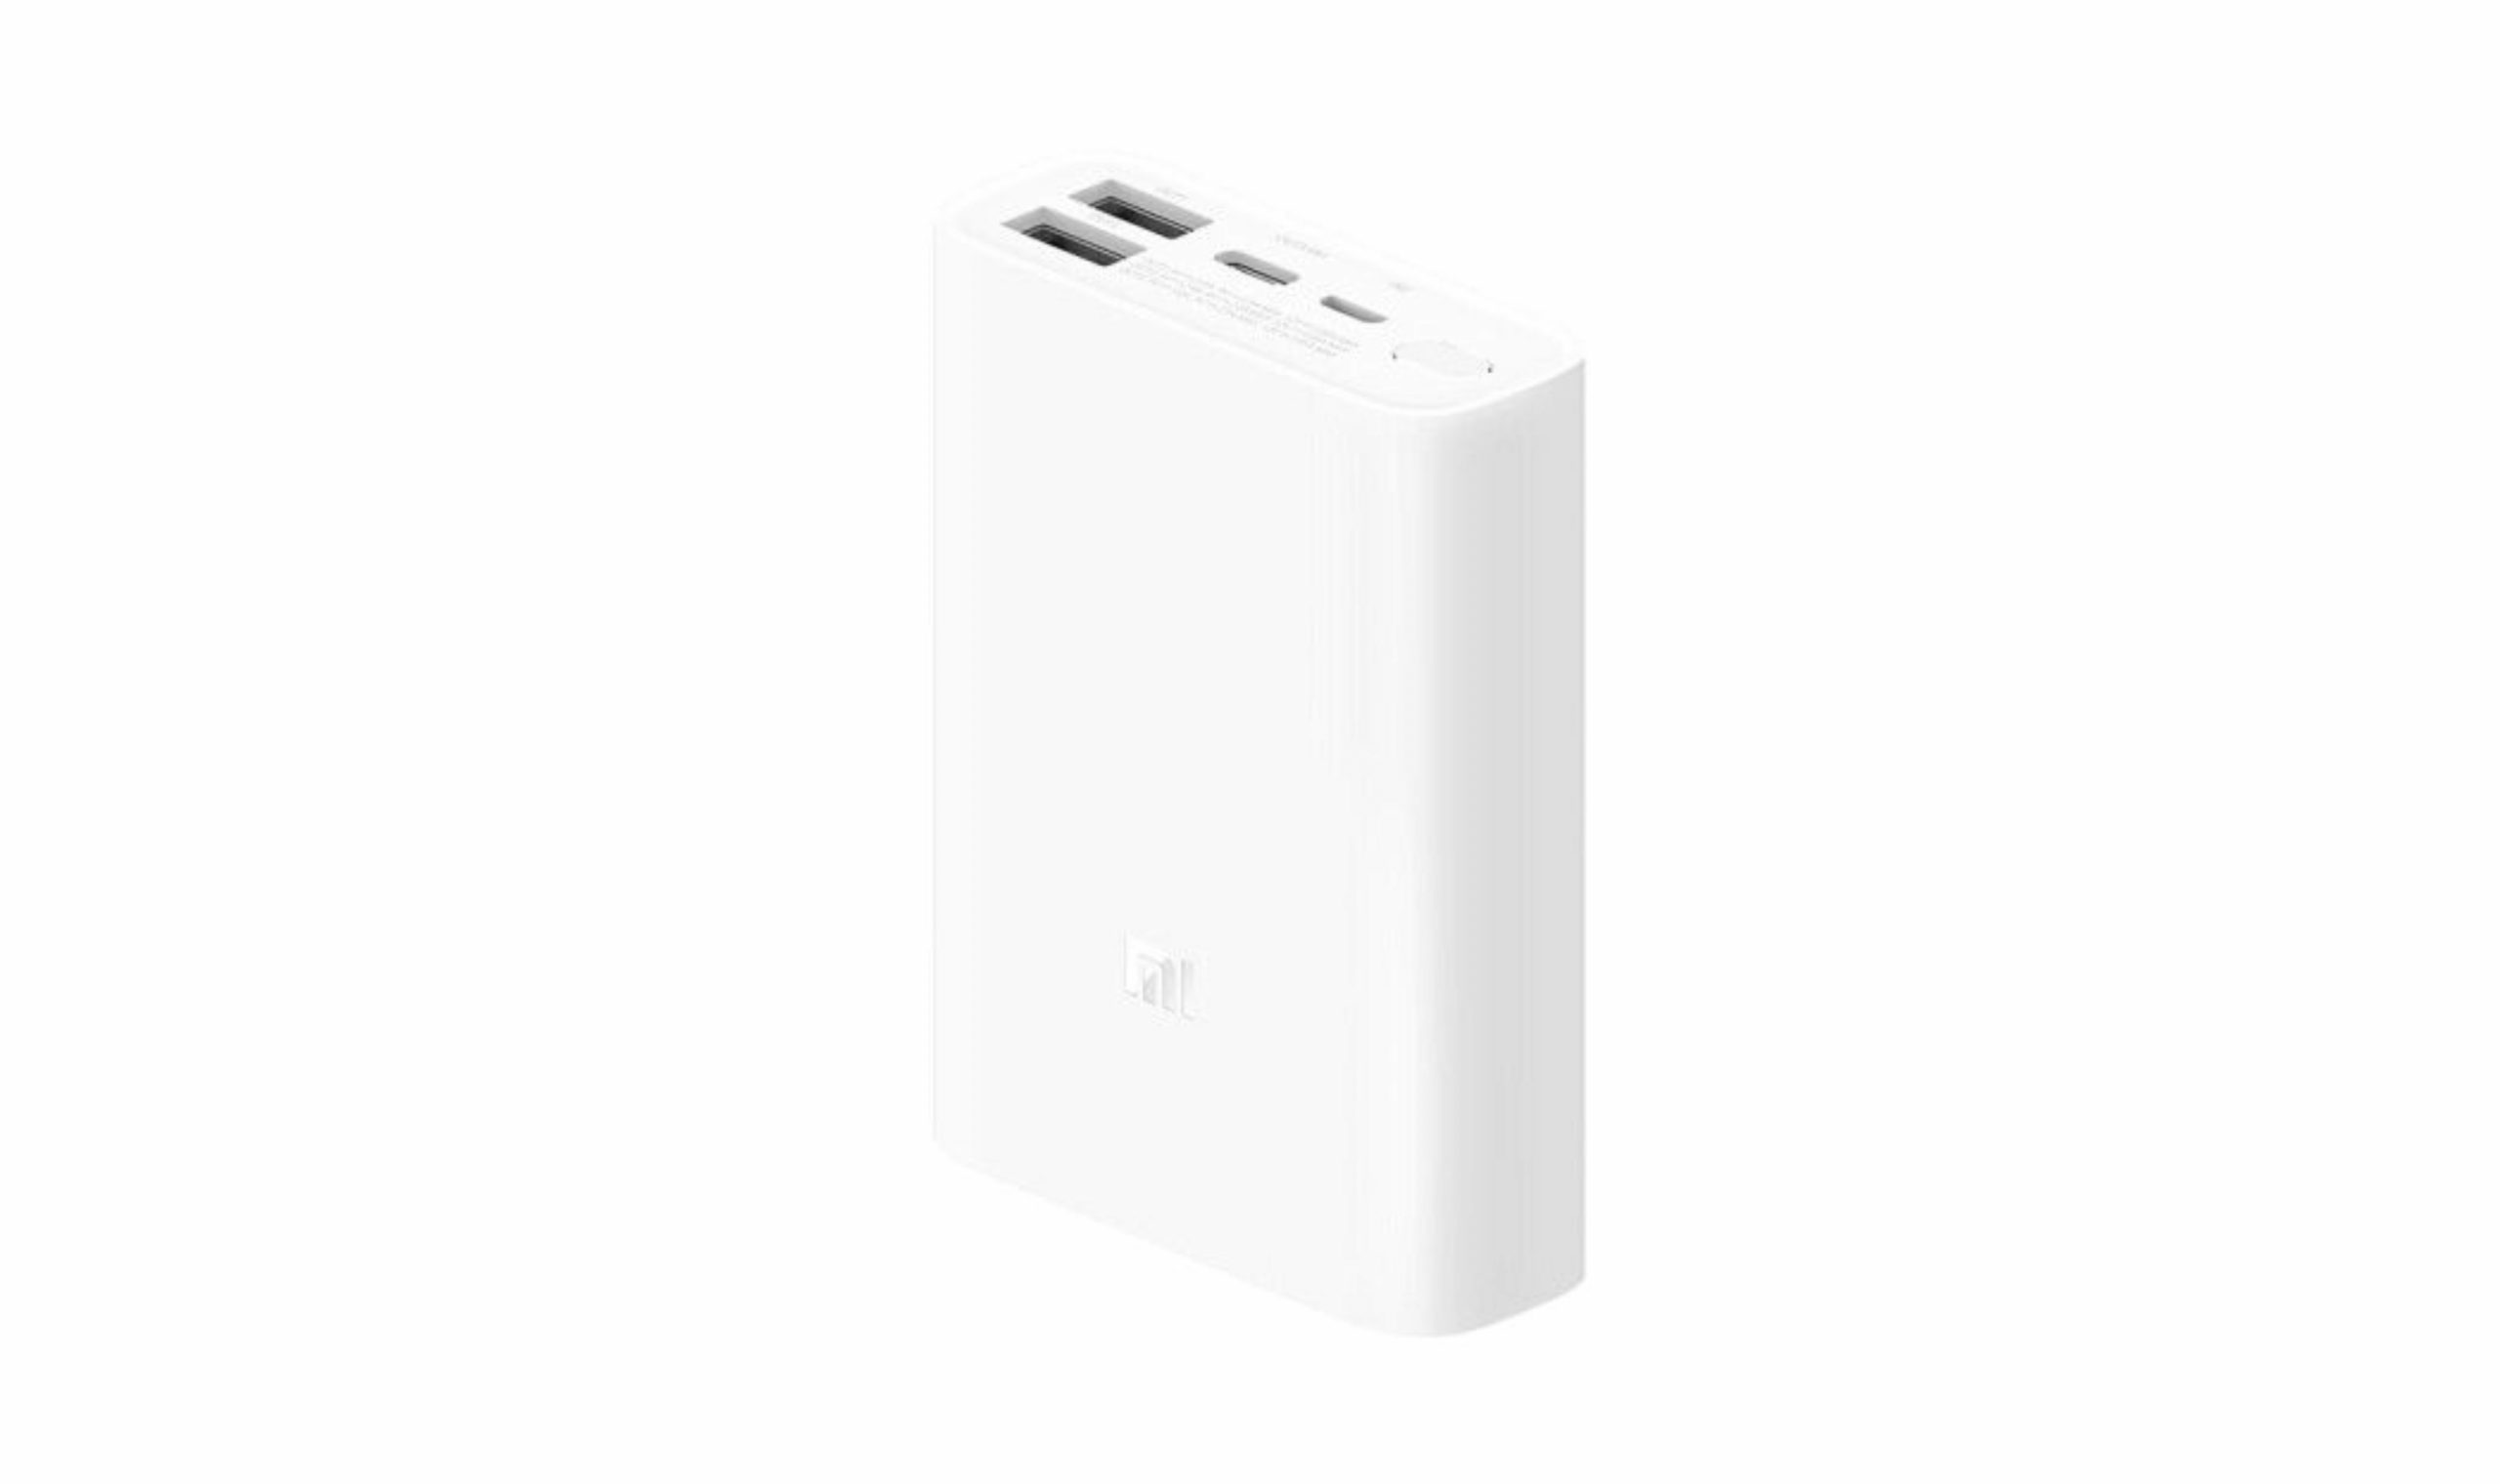 Xiaomi Mi Power Bank 3 Pocket Edition launched with 22.5W charging support